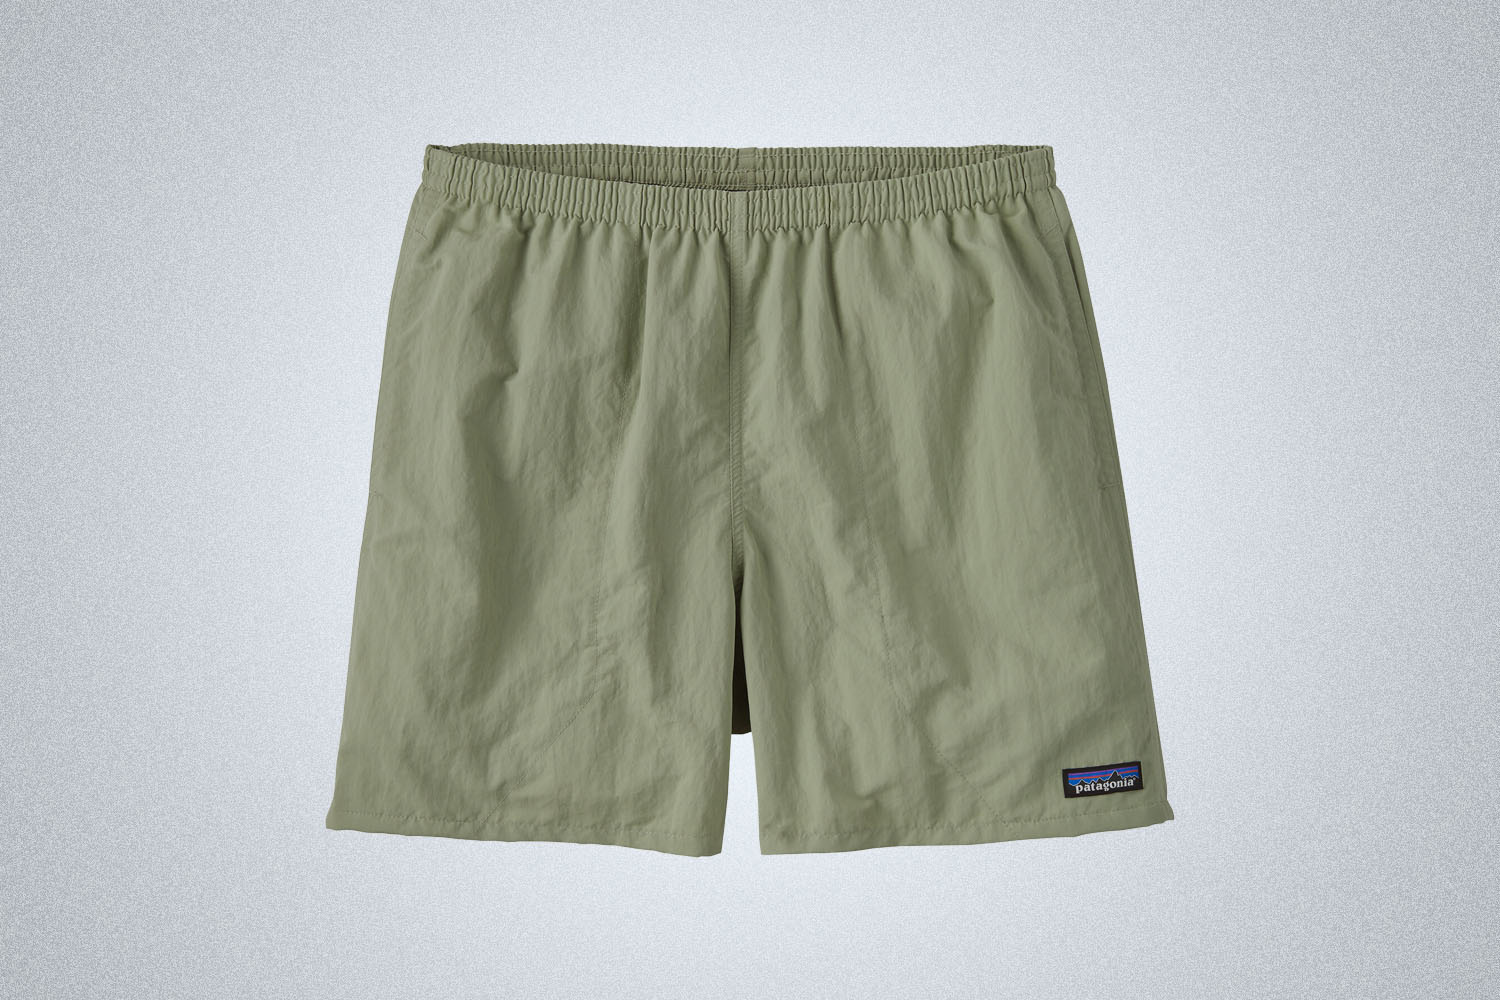 The Shorts That Also Work as Swim Trunks: Patagonia 5" Baggies Shorts